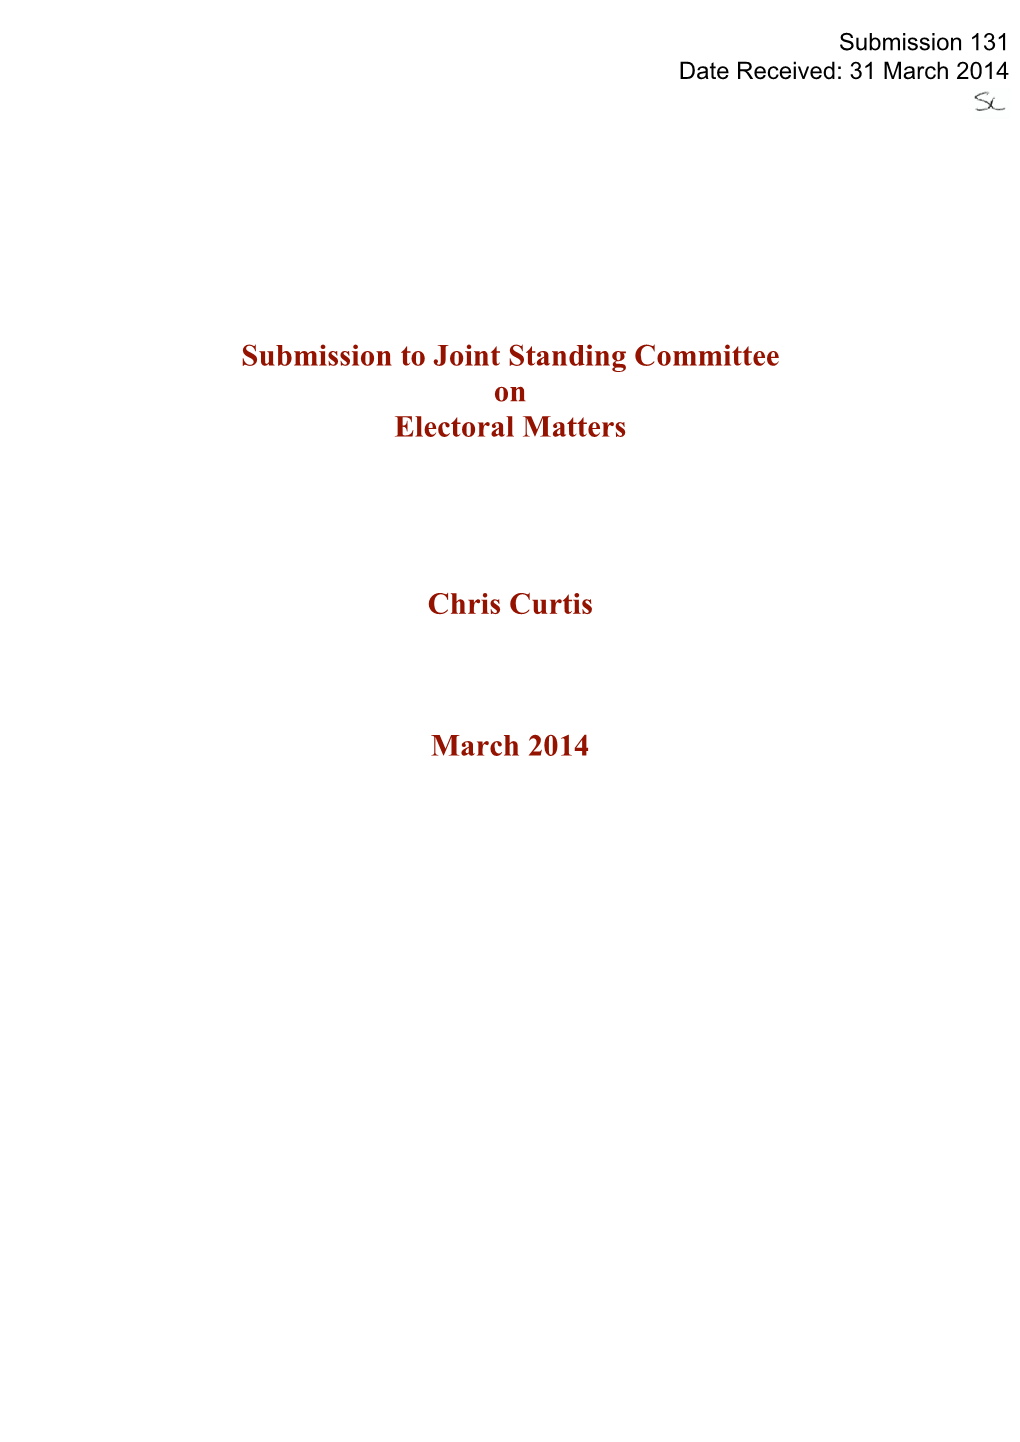 Submission to Joint Standing Committee on Electoral Matters